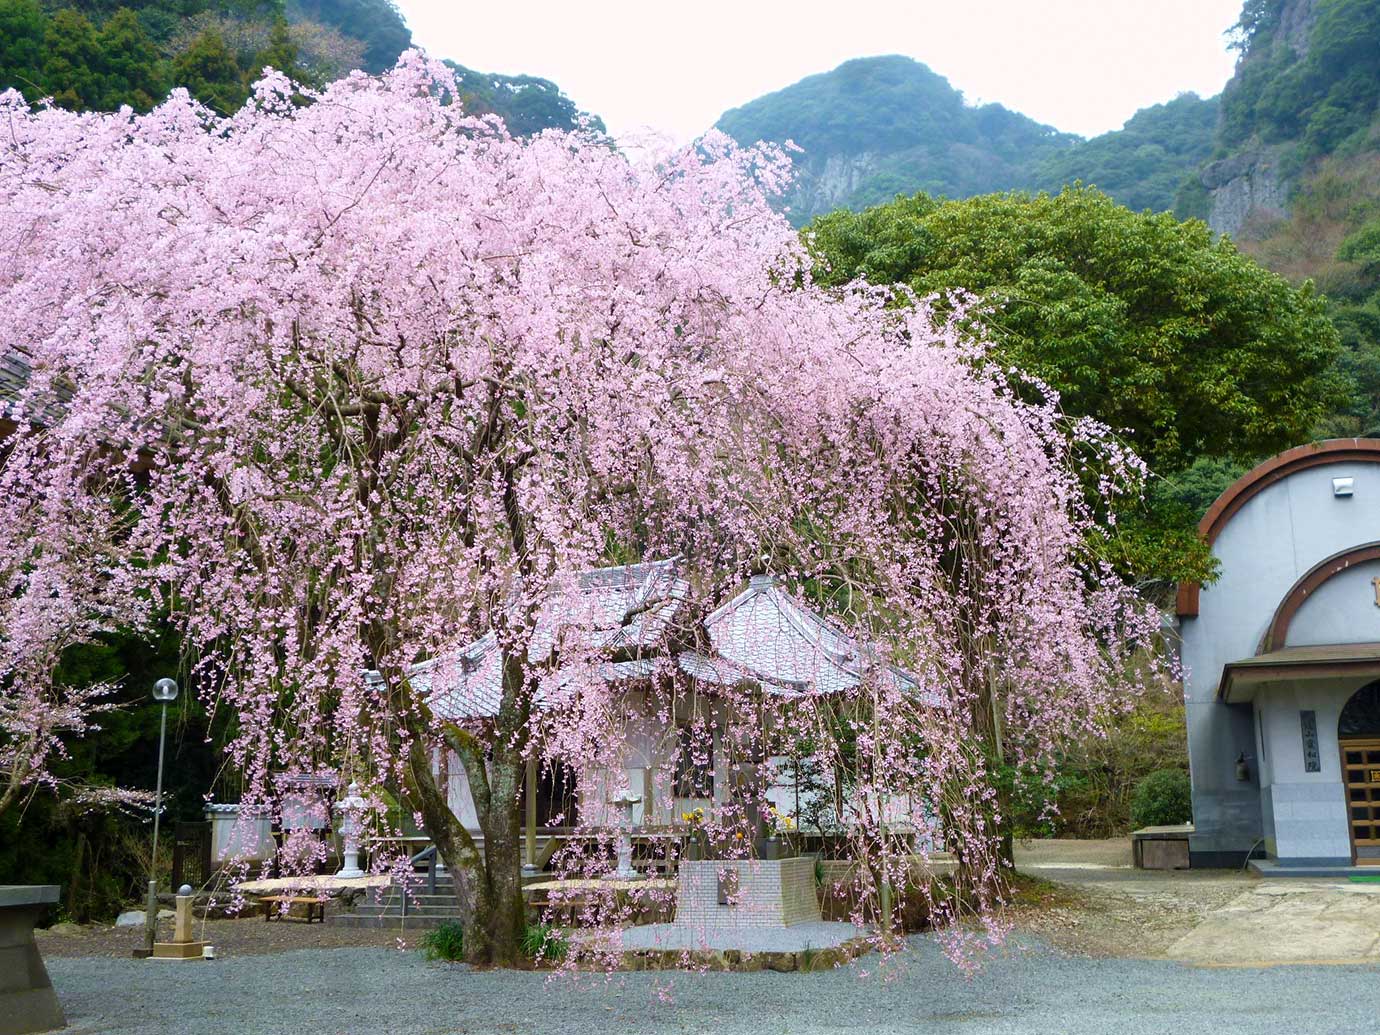 Jisso Temple's weeping cherry trees